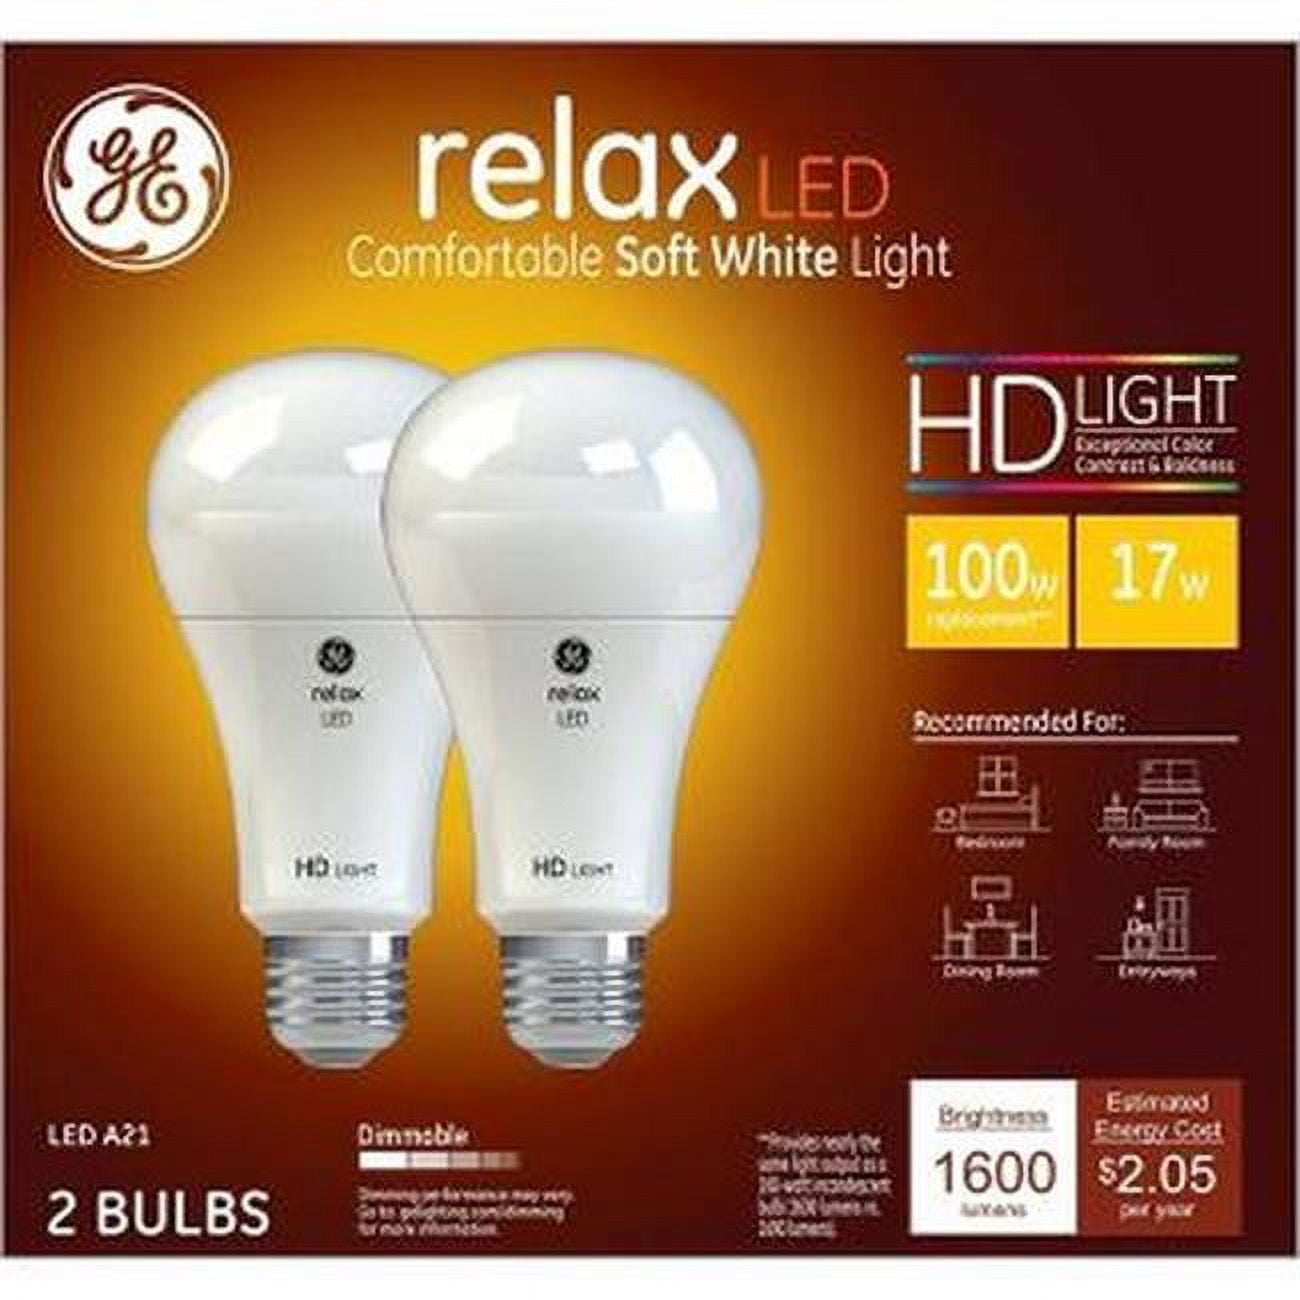 General Electric 93129807 13.5W LED A19 Dimmable Relax Light Bulbs, Soft White - 100W Equivalent - Pack of 2 -  General Electric Corporation